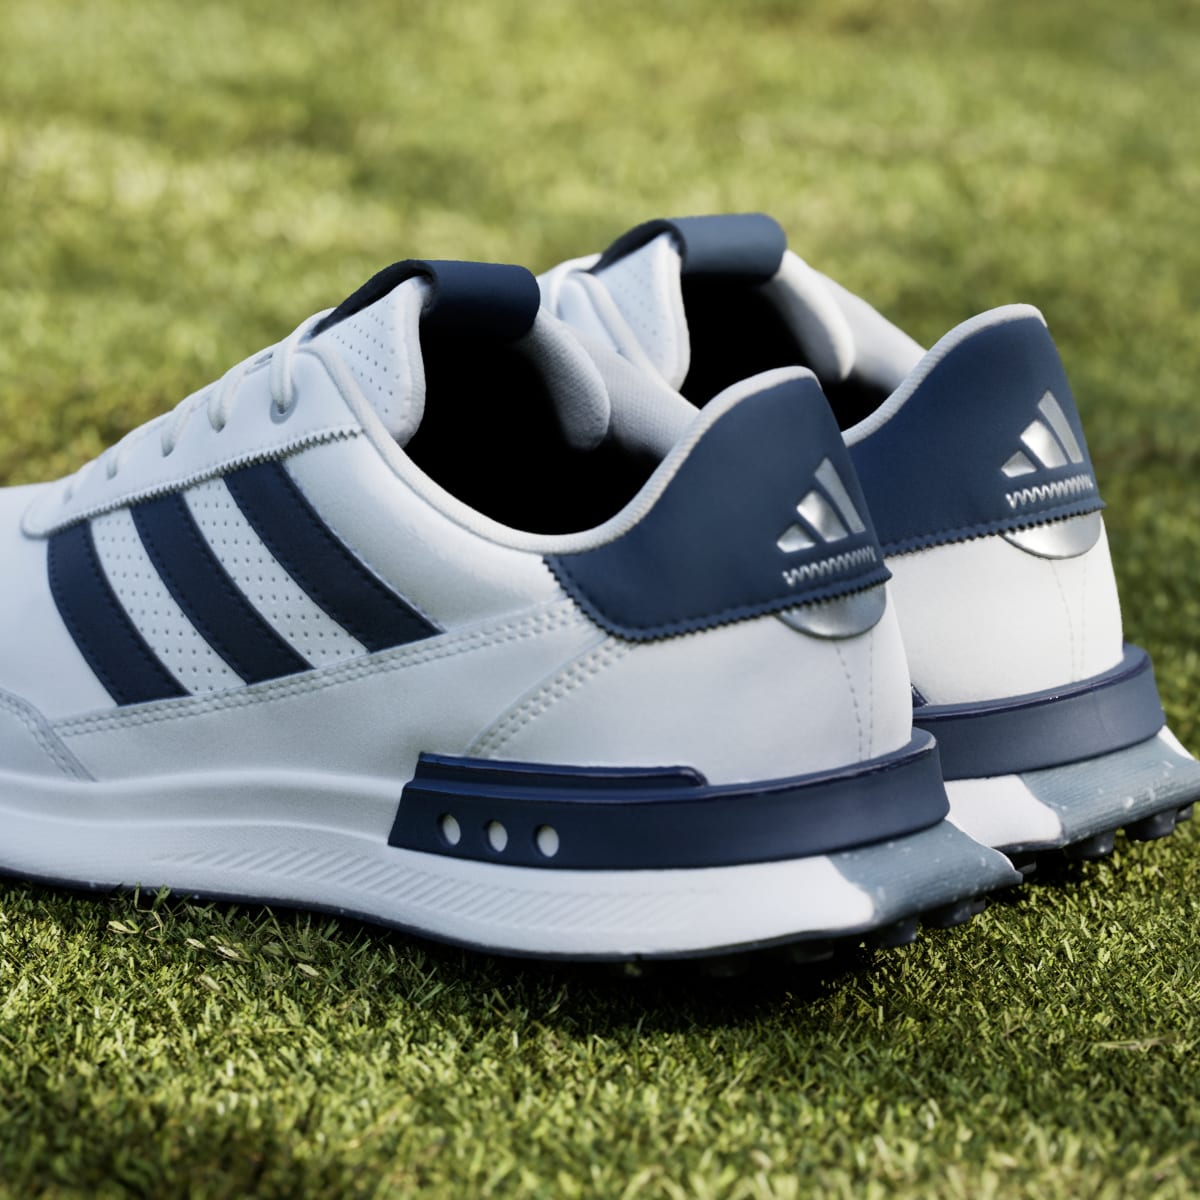 Adidas S2G Spikeless Leather 24 Golf Shoes. 9